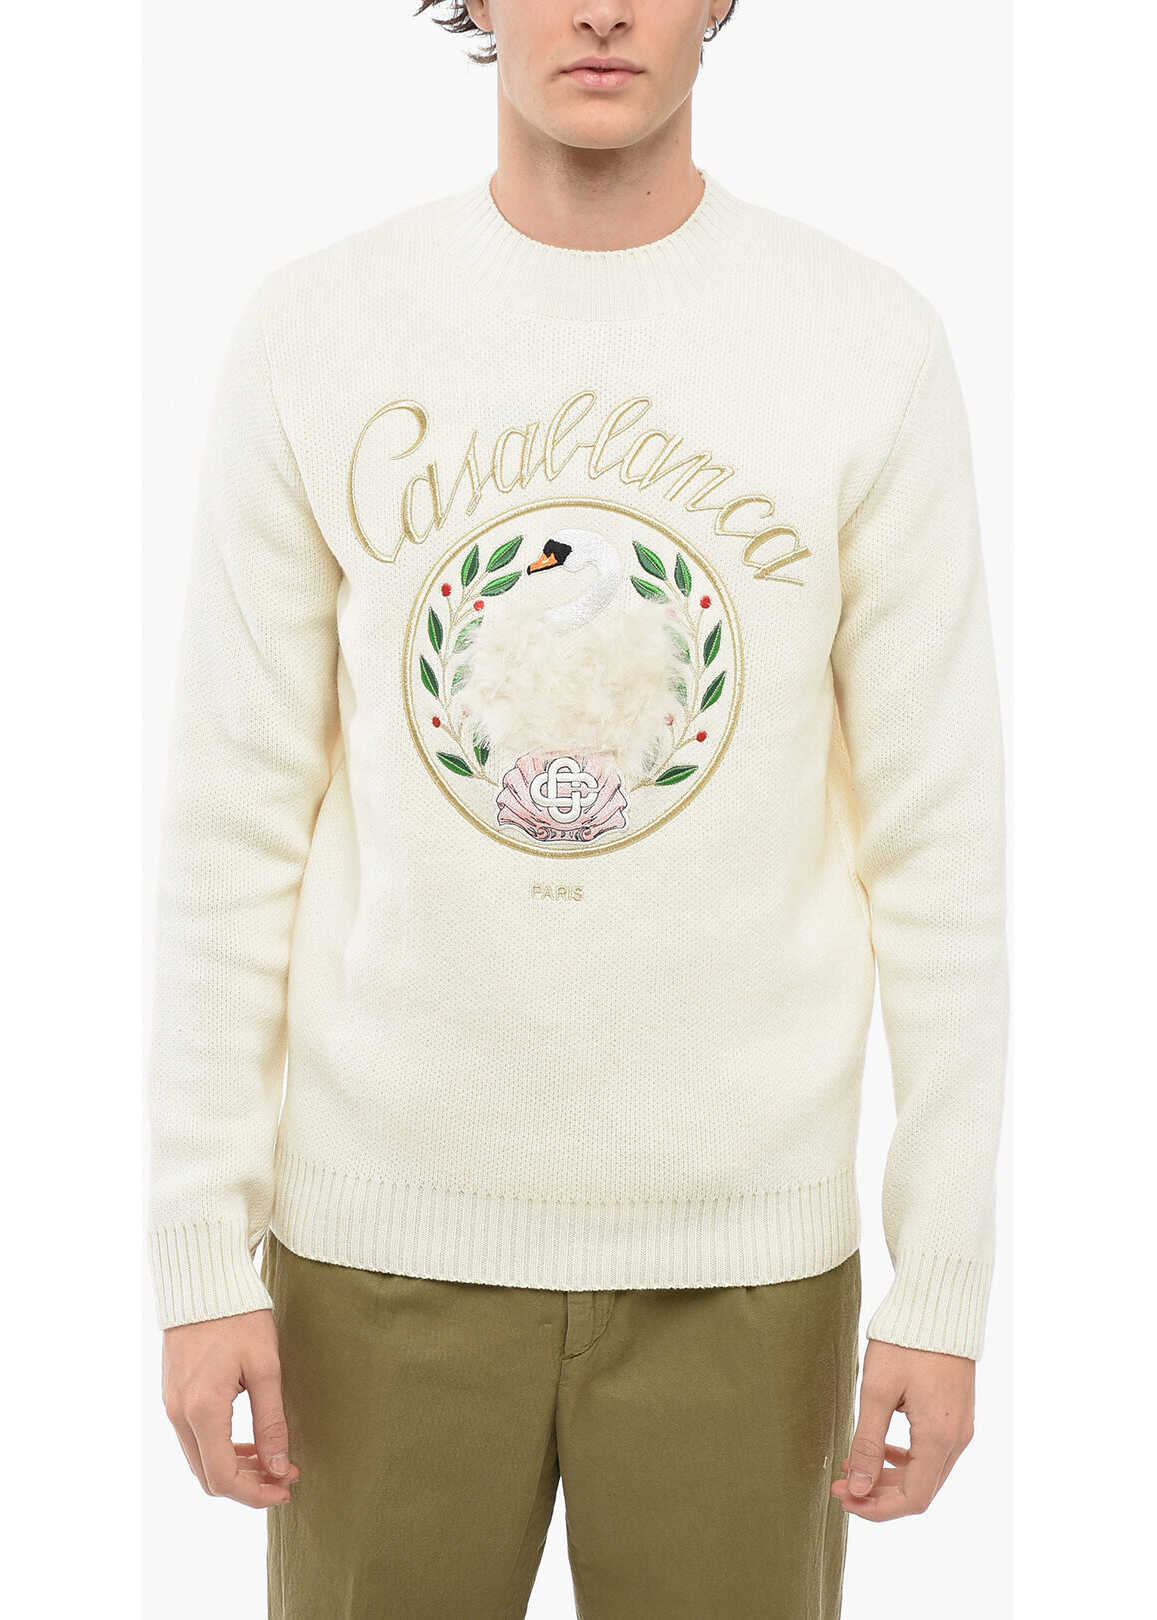 Casablanca Cashmere Embleme De Cygne Sweater With Embroidery White